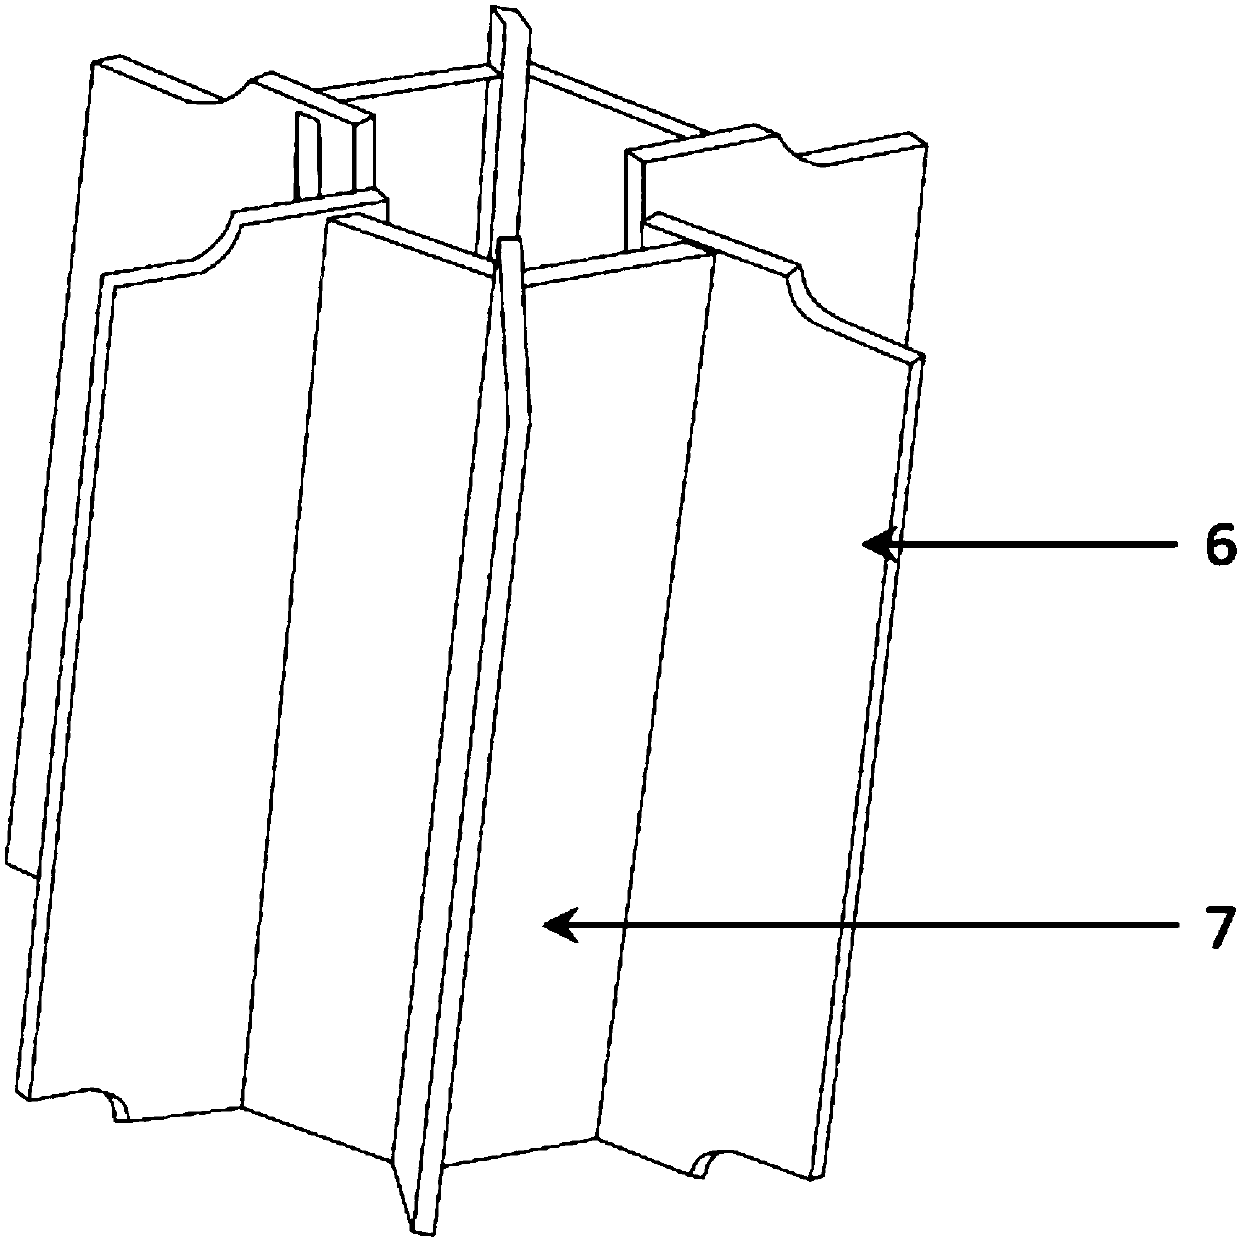 Reticulated shell structure and box type joint support of reticulated shell structure